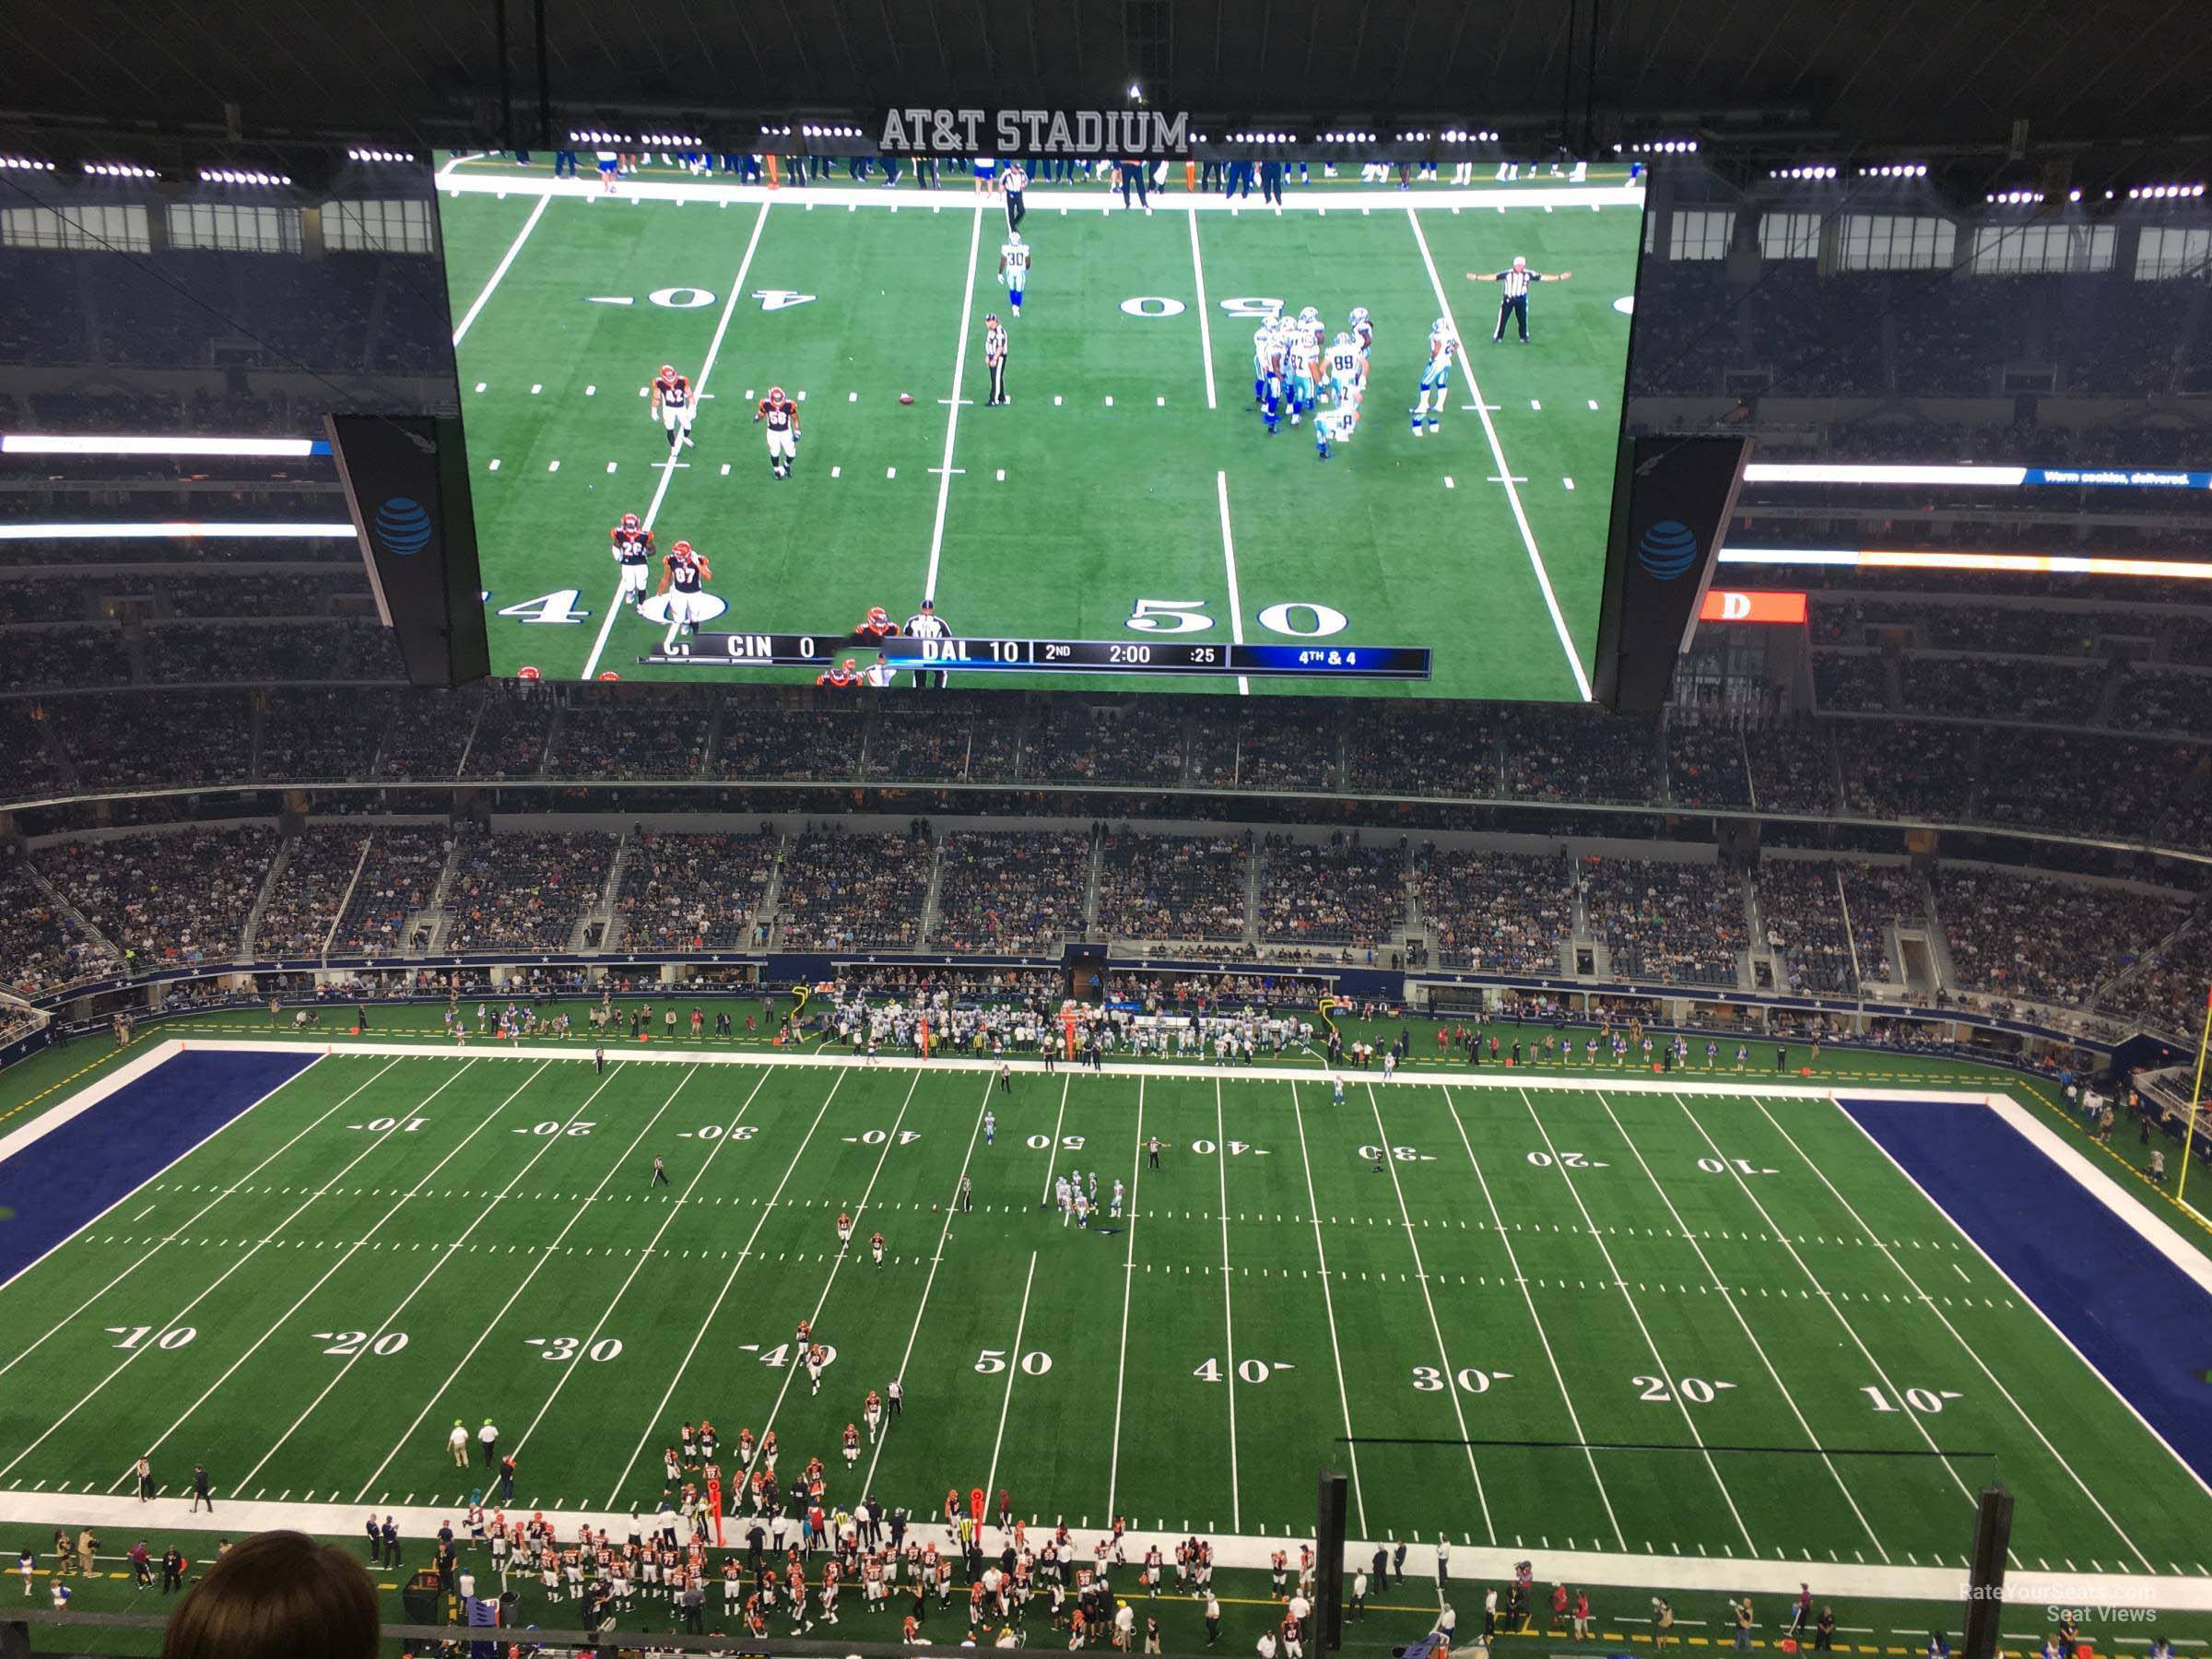 section 442, row 4 seat view  for football - at&t stadium (cowboys stadium)